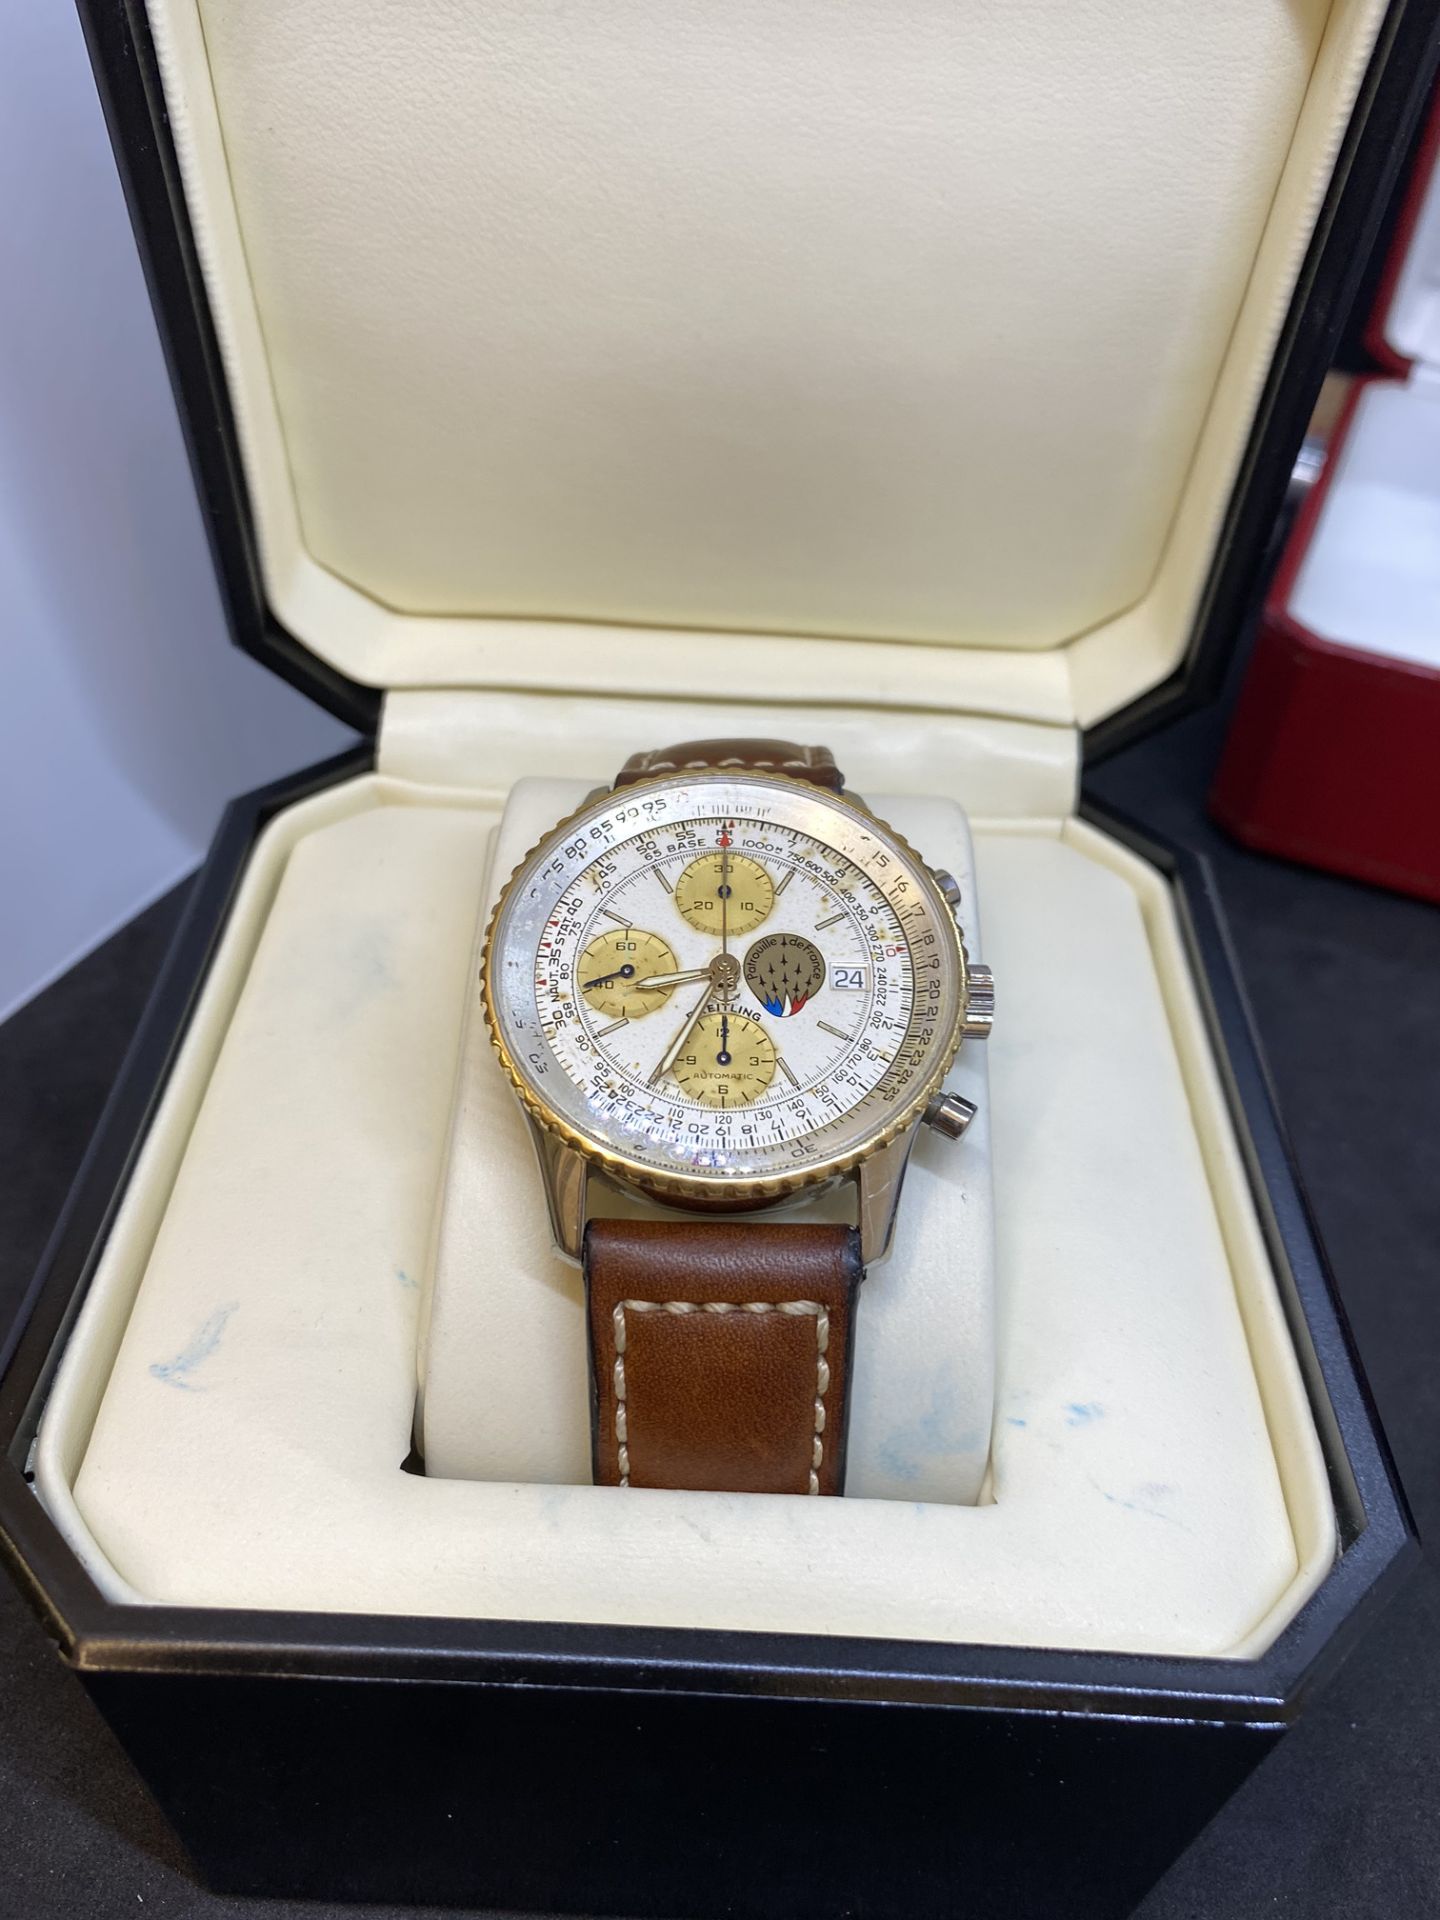 Breitling Navitimer Chronograph Watch with Box